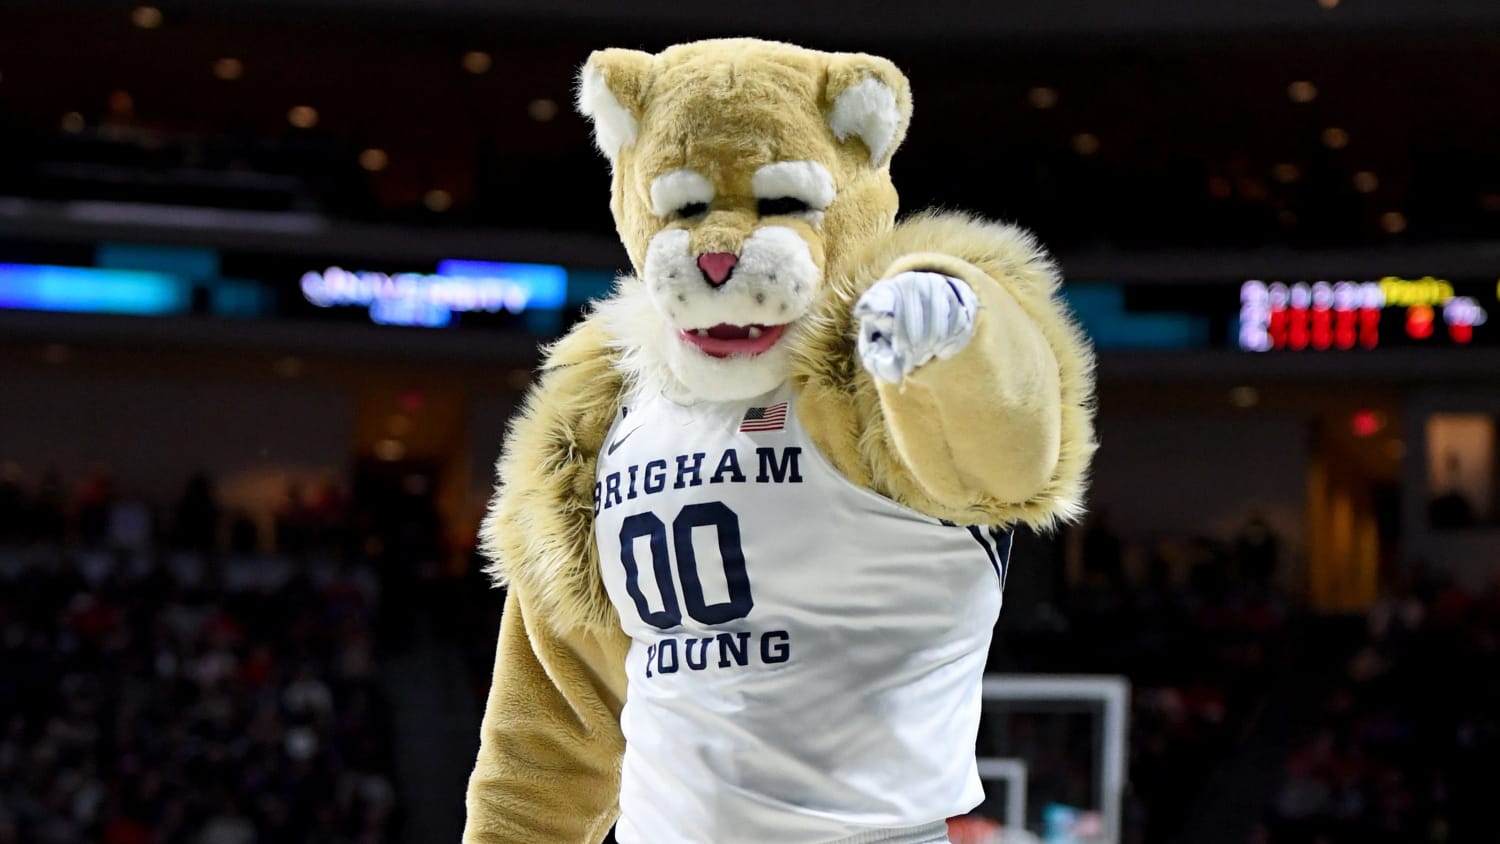 Utah man who attended BYU-Gonzaga game diagnosed with coronavirus; school alerts other fans